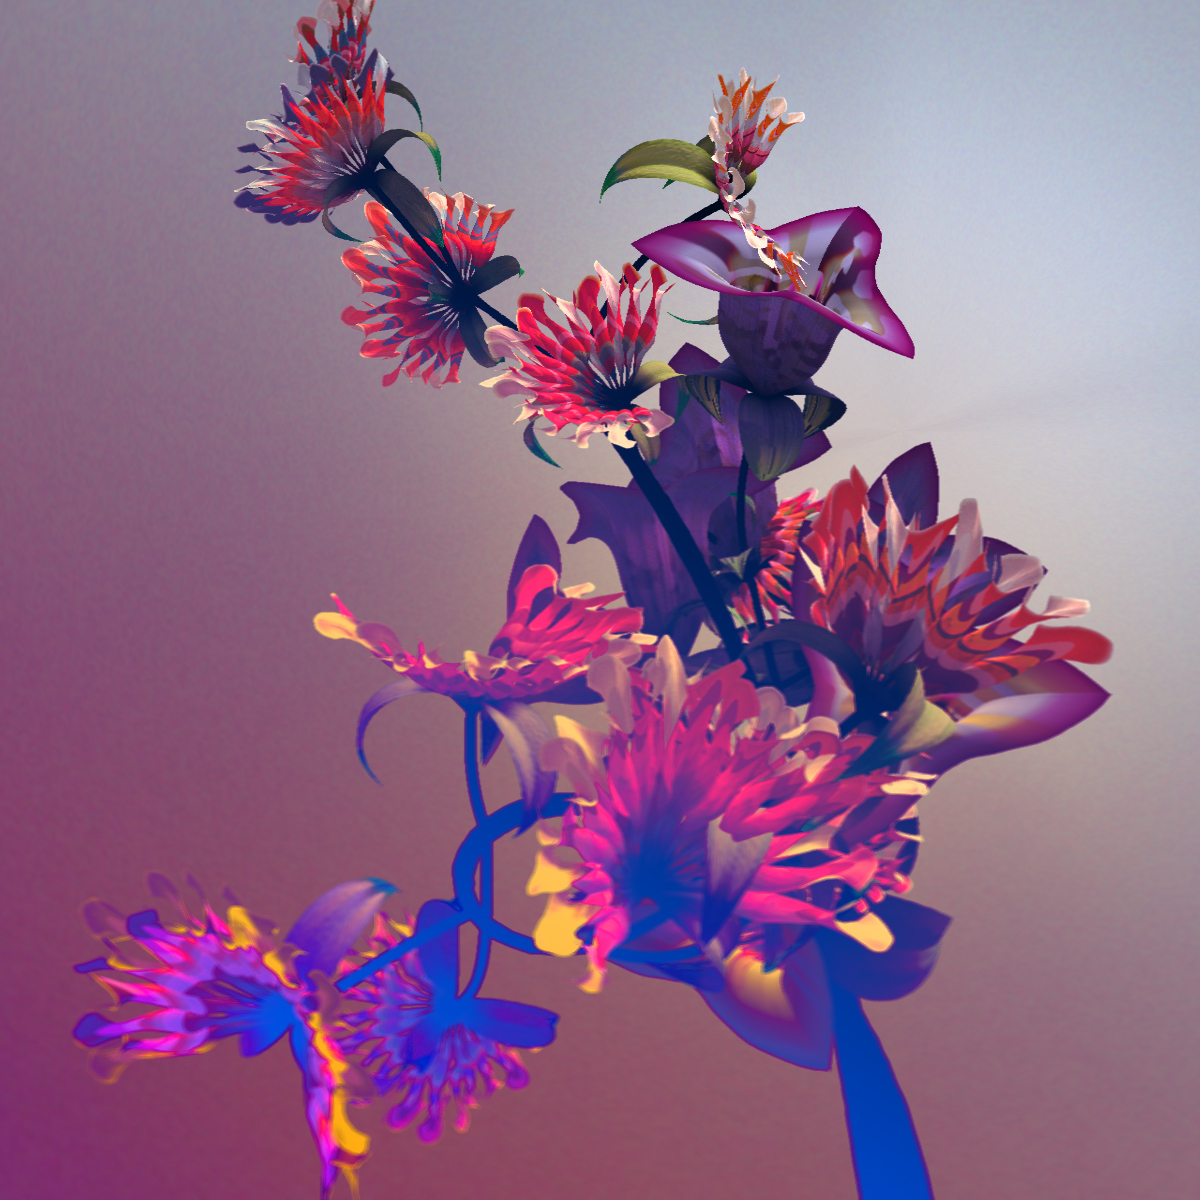 Screen capture of multi-coloured digitally generated flowers